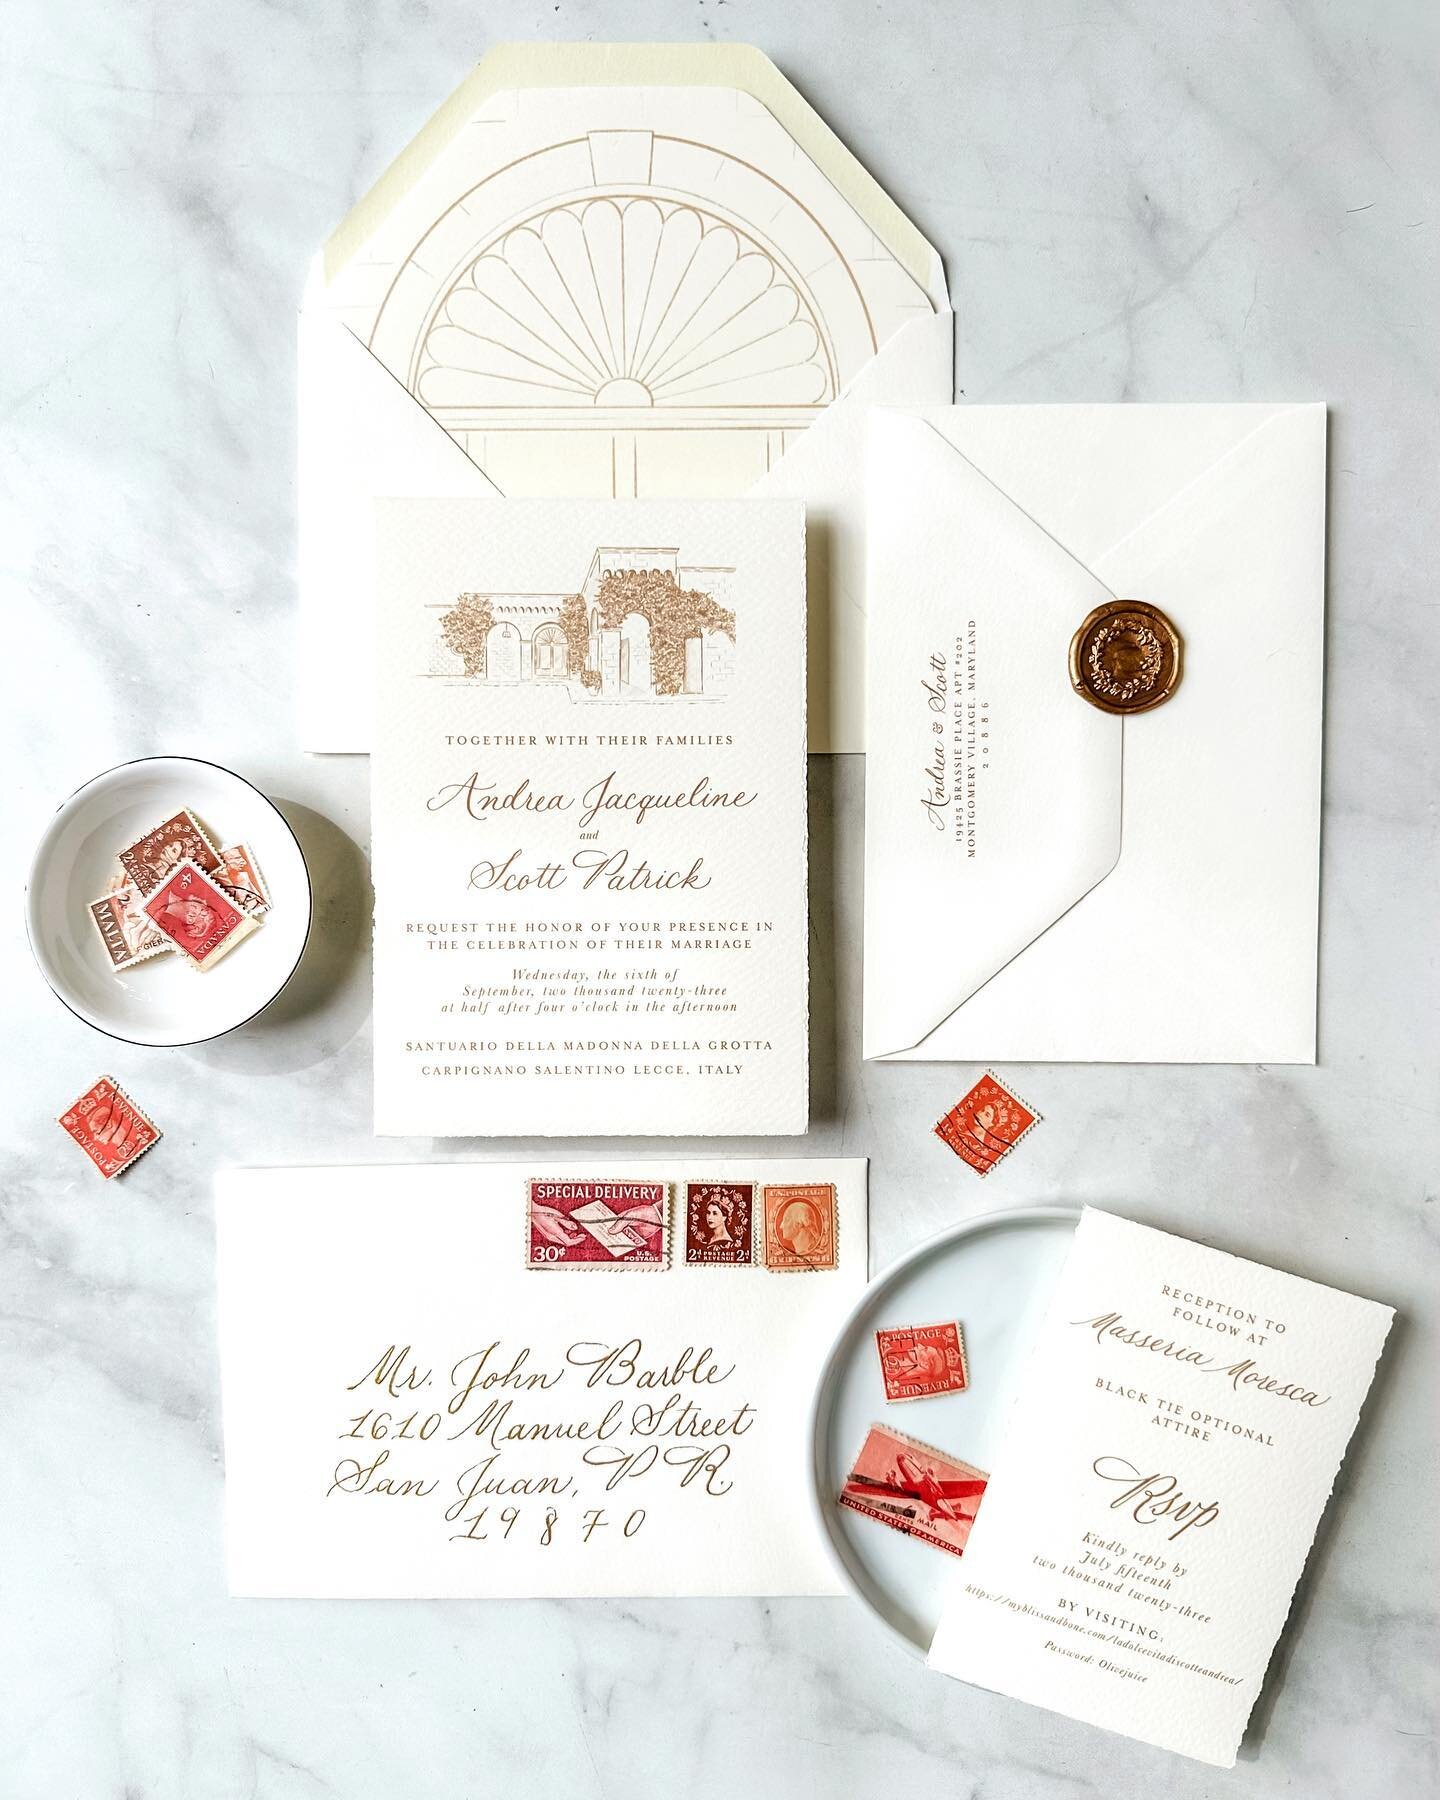 Andrea &amp; Scott&rsquo;s invitation suite is a combination of clean and romantic. Making the venue in their Puglia destination wedding, the star of the show&hellip;and I&rsquo;m all for it! 
.
.
#destinationwedding #pugliawedding #invitationsuite #